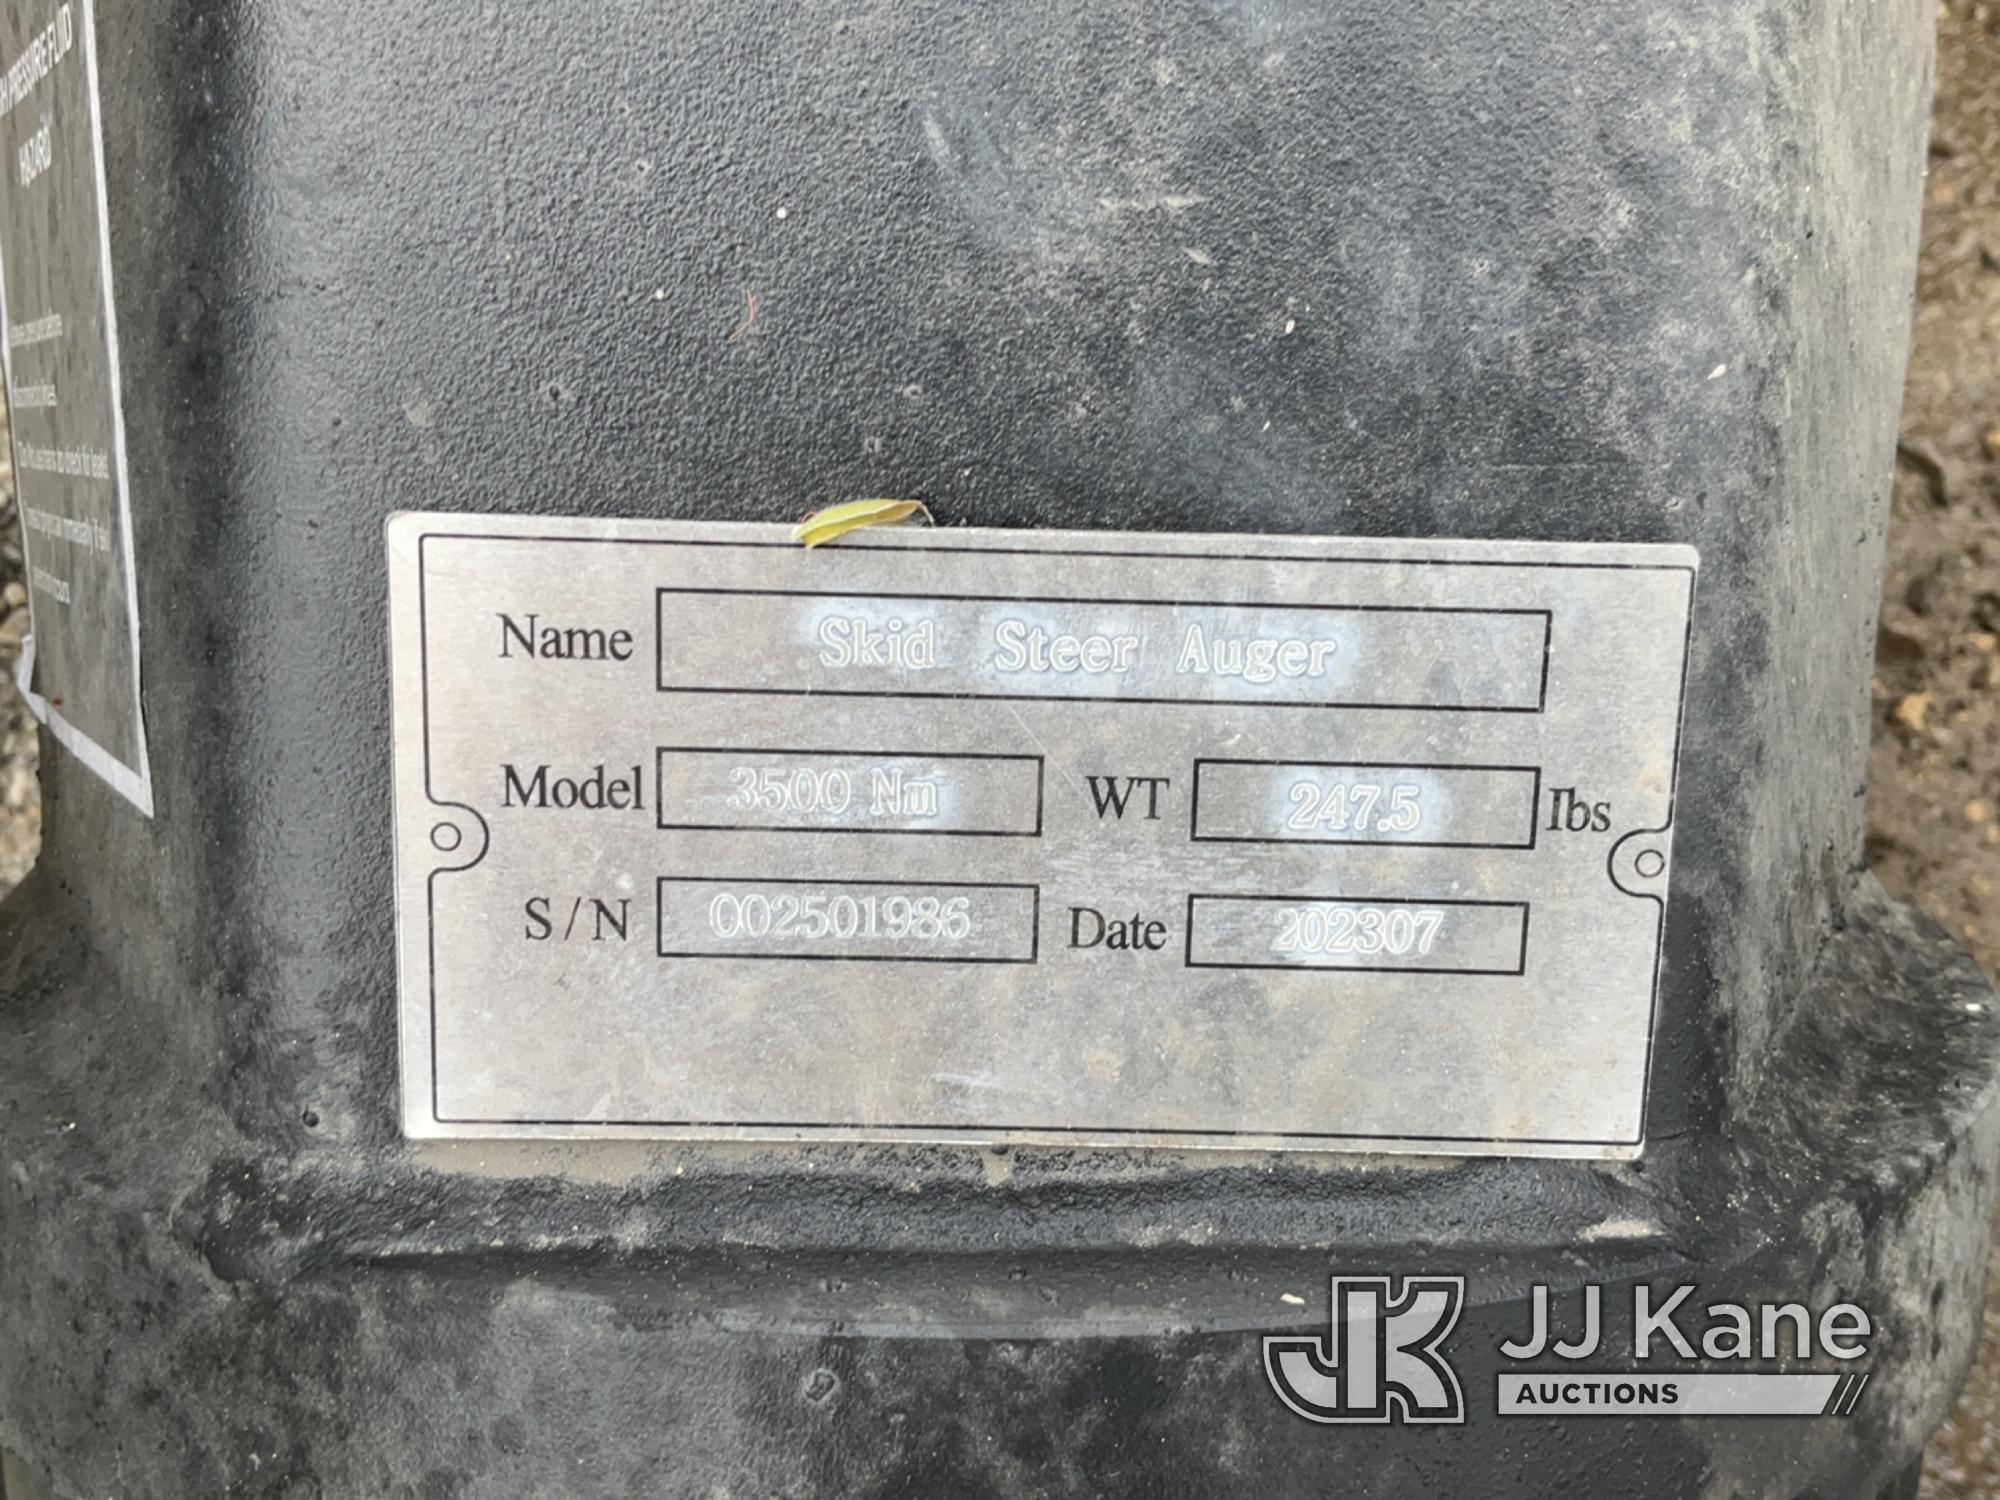 (South Beloit, IL) 2023 Greatbear Skid Steer Auger With Three Bits (New/Unused) NOTE: This unit is b